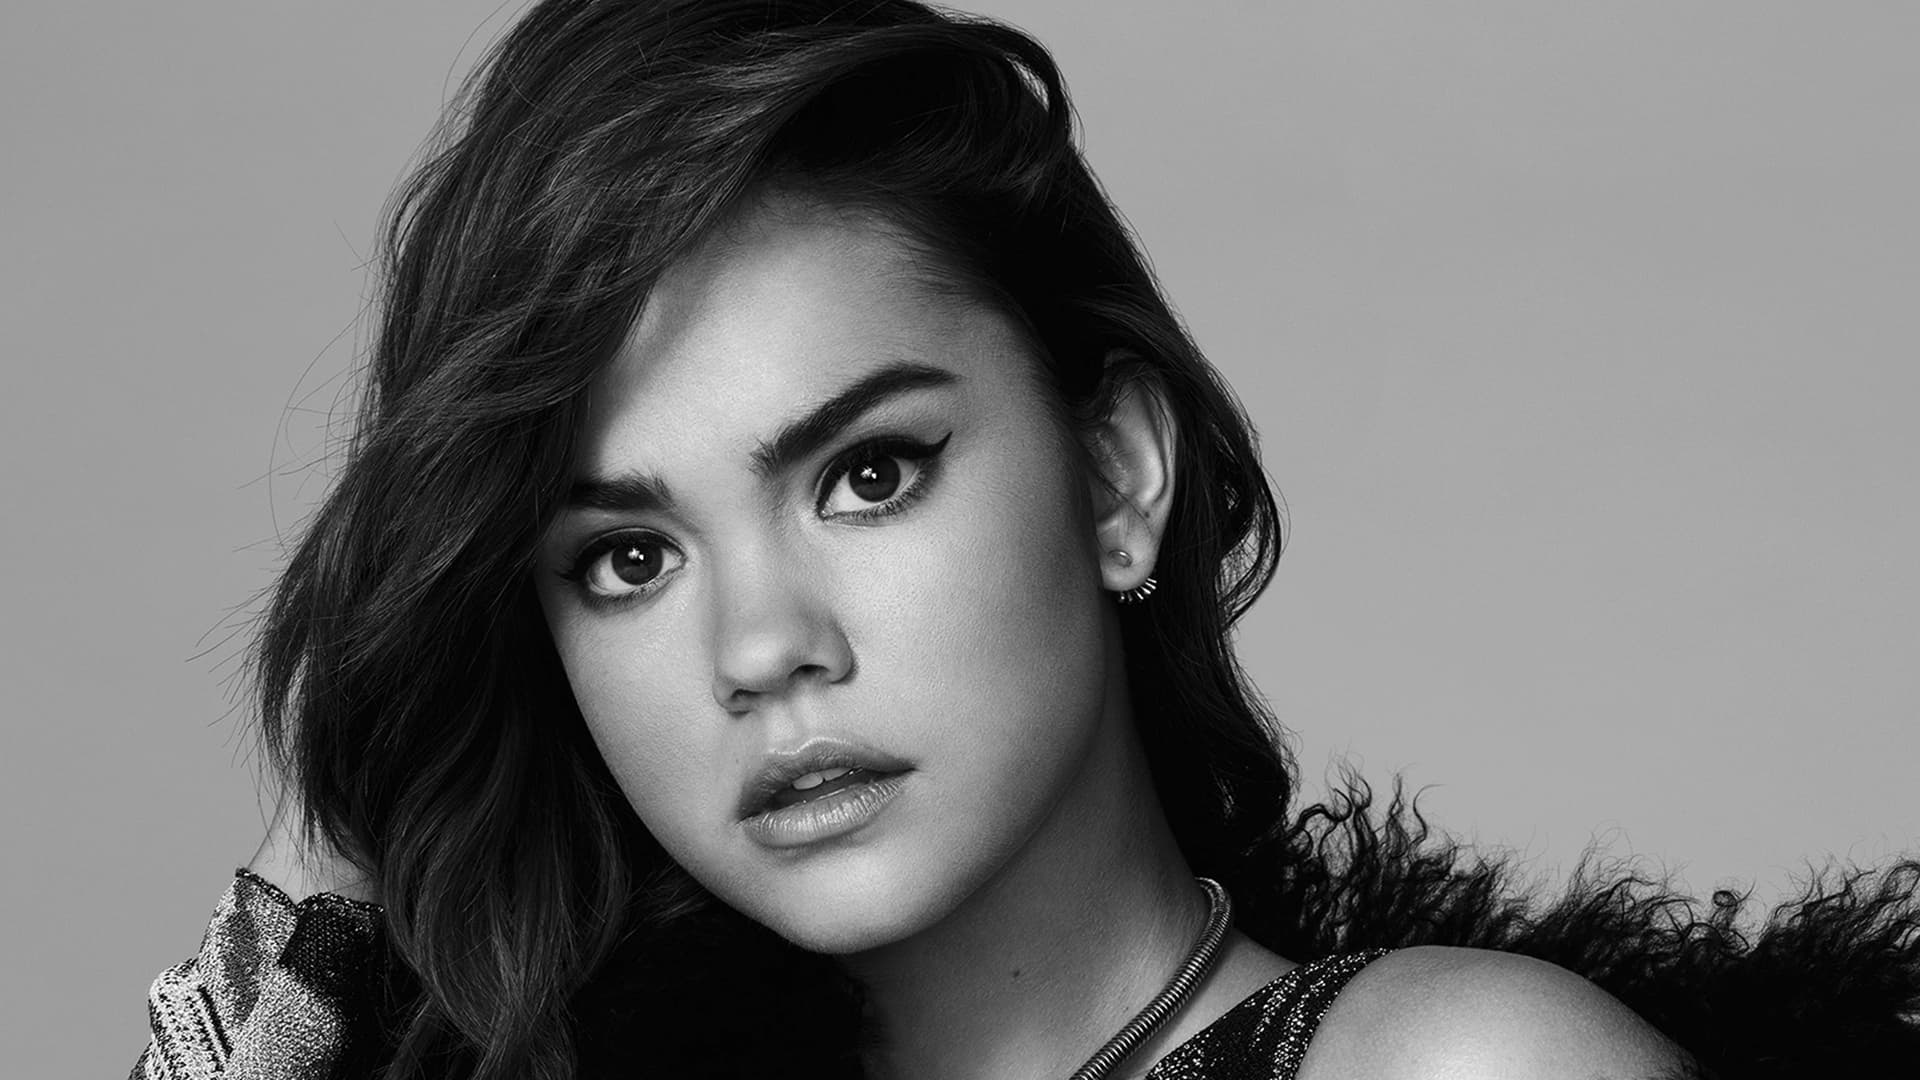 Maia Mitchell wallpaper HD High Quality Resolution Download